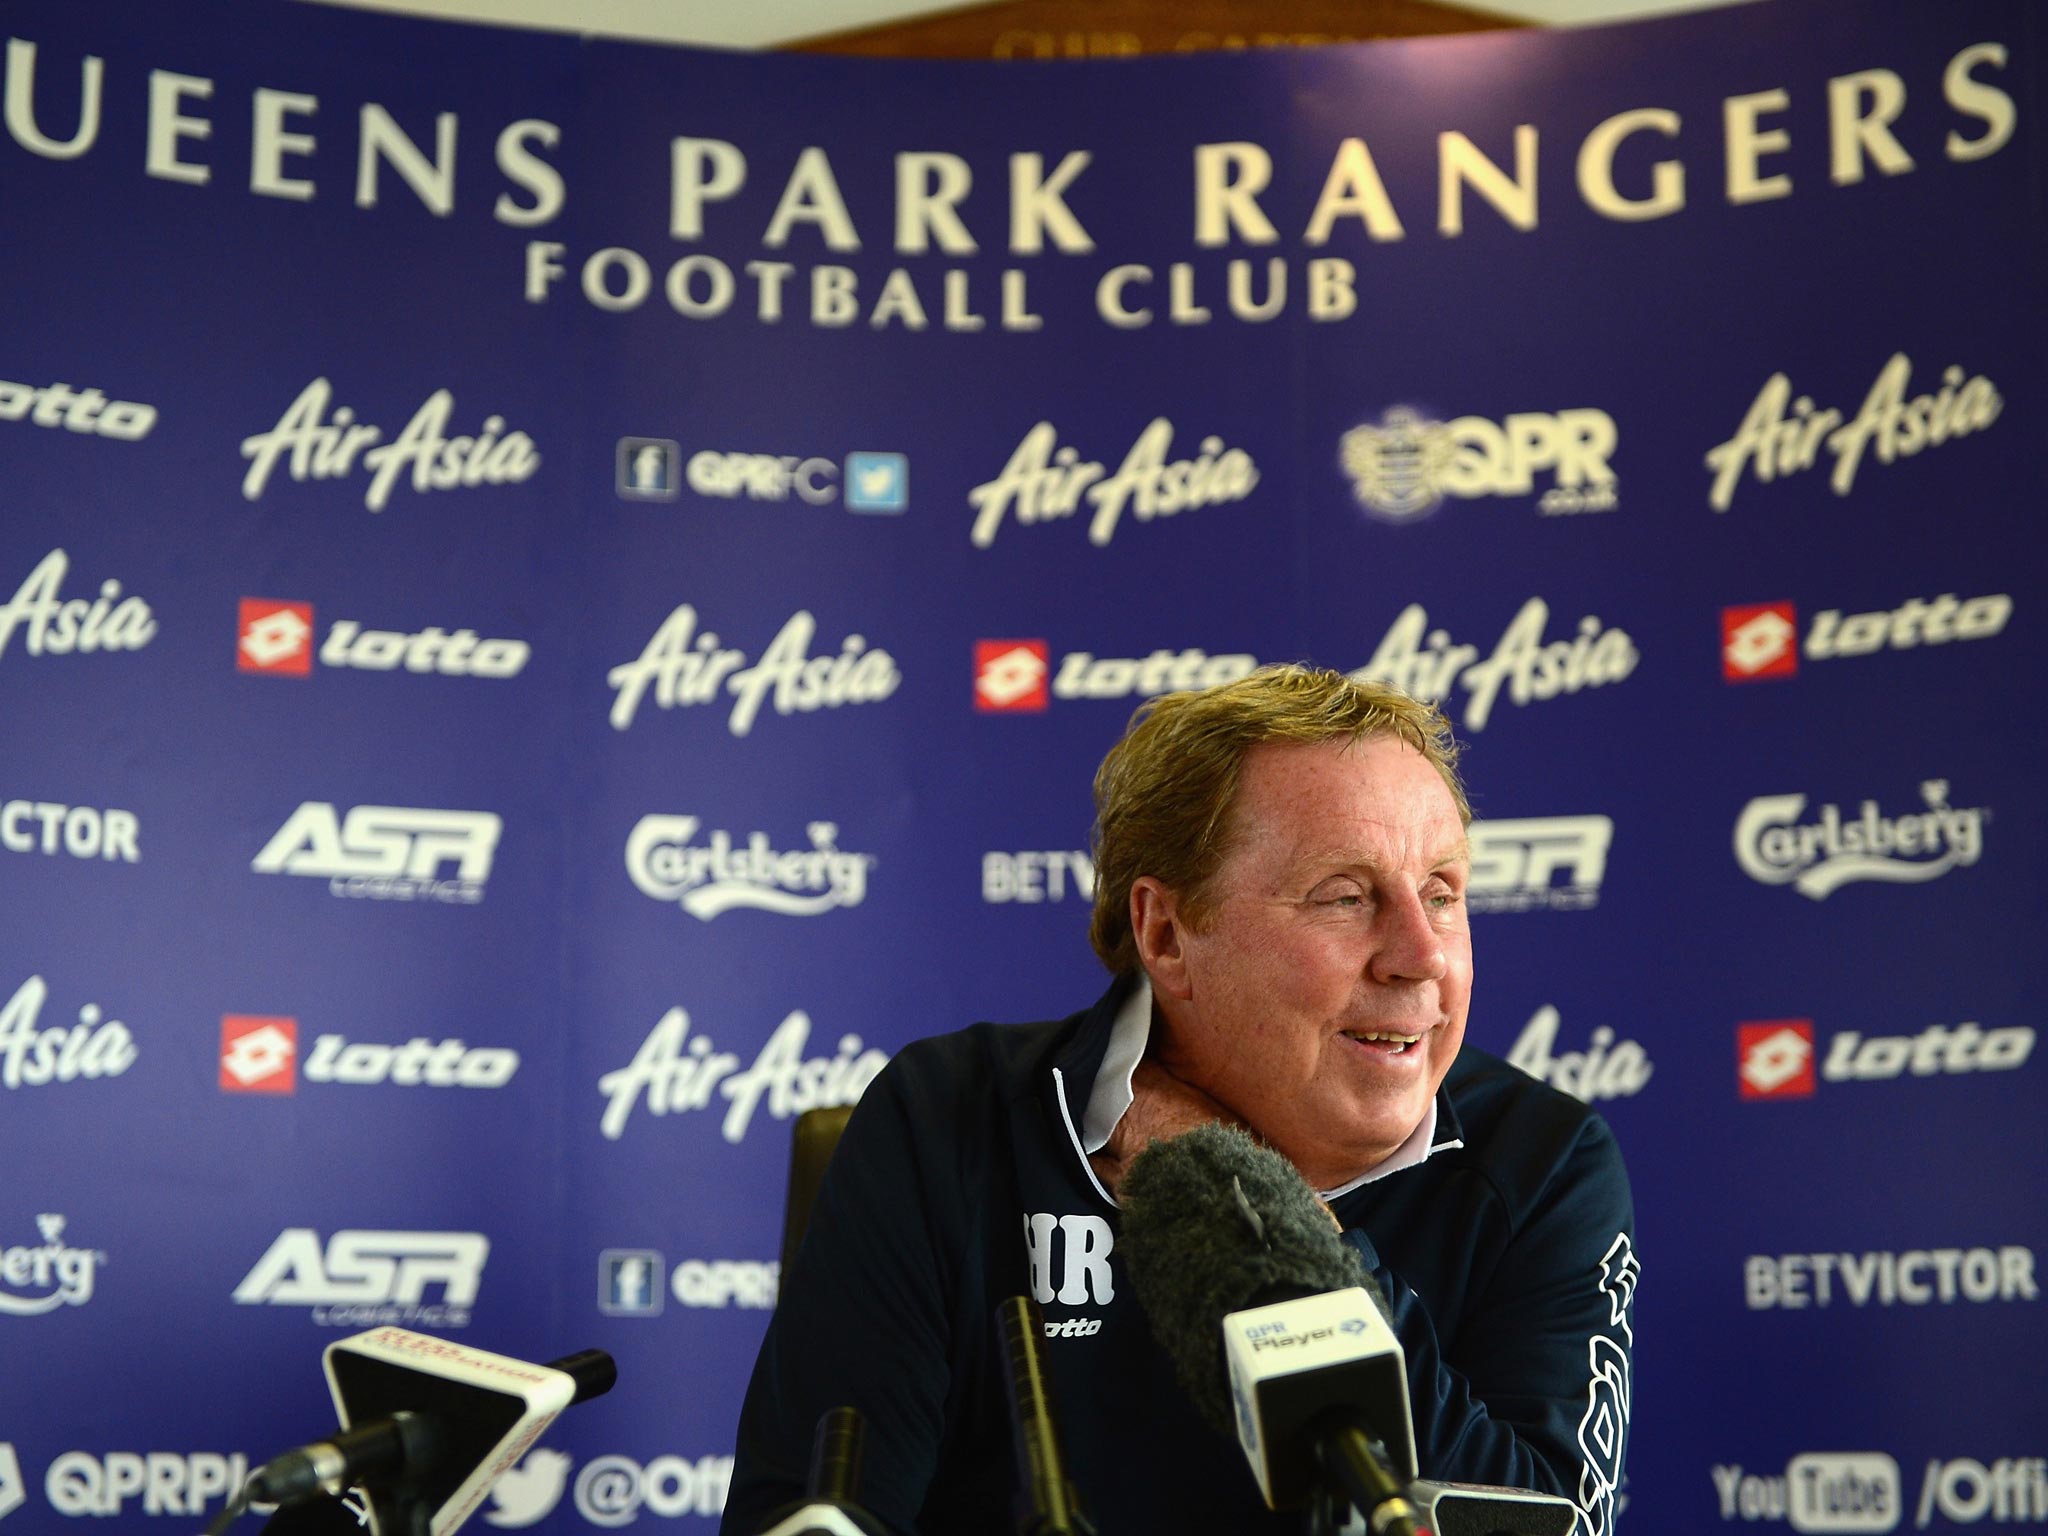 Harry Redknapp claimed his expensive squad had ‘done well’ after the upheaval of last summer